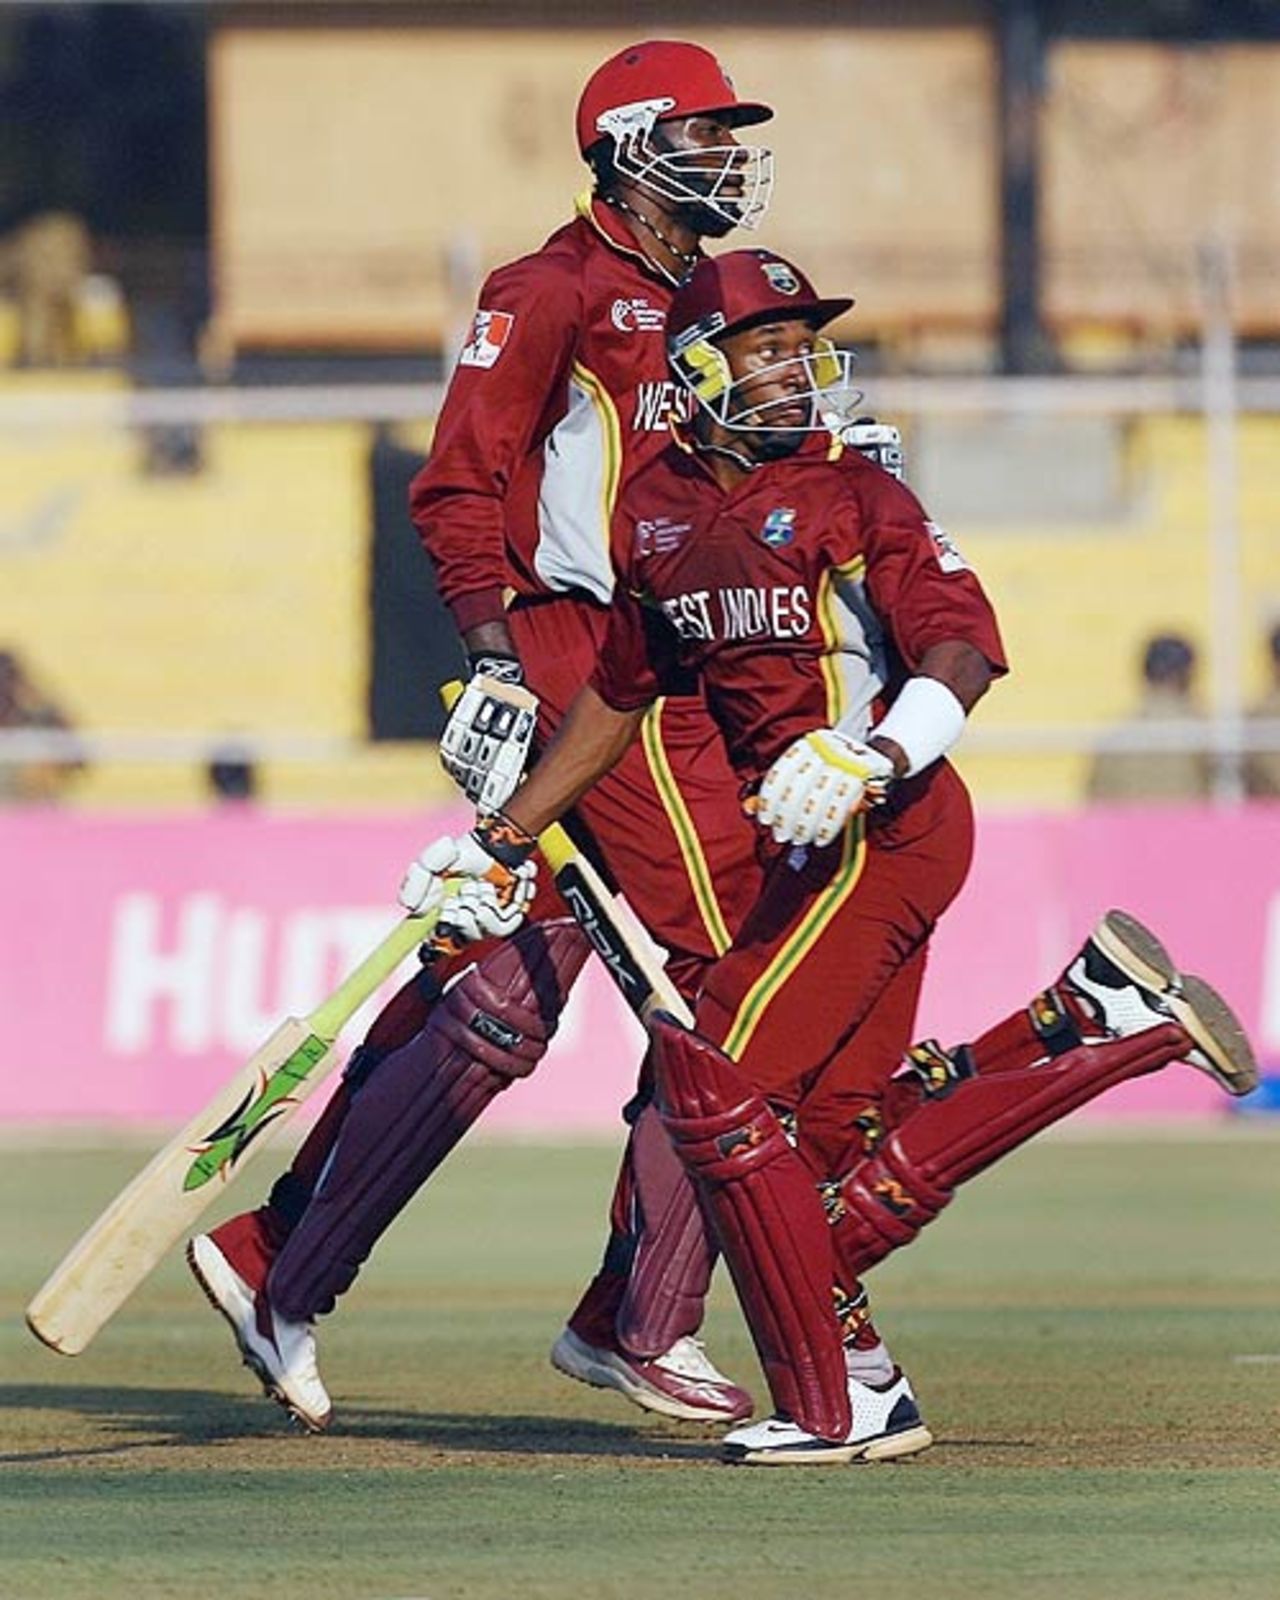 Chris Gayle and Dwayne Bravo added 174 for the second wicket, England v West Indies, 17th match, Champions Trophy, Ahmedabad, October 28, 2006